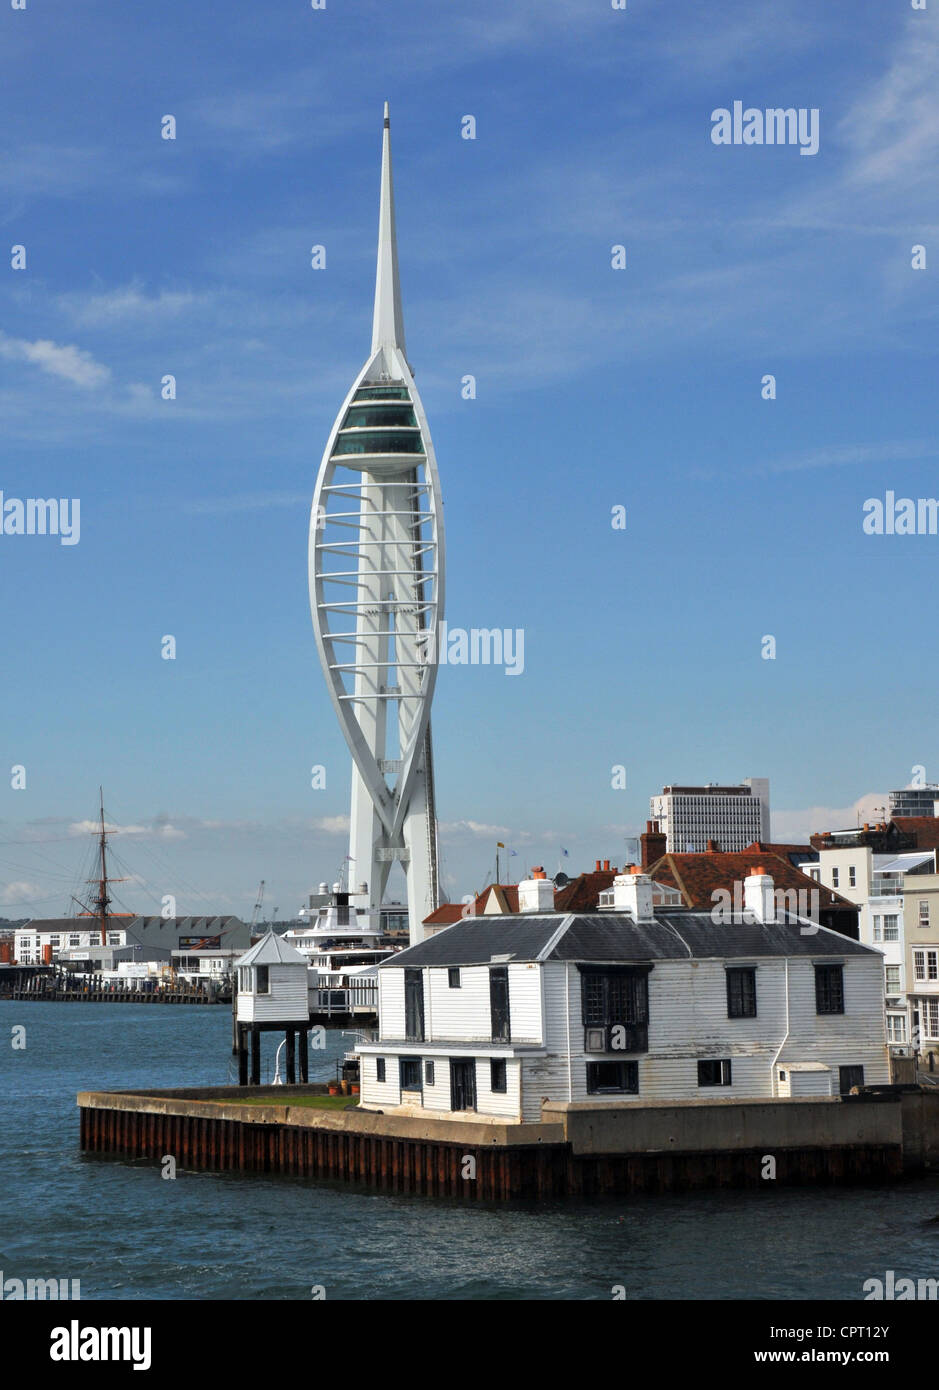 The Spinnaker Tower and Old Customs House at the entrance to Portsmouth Harbour, Hampshire, England. Stock Photo